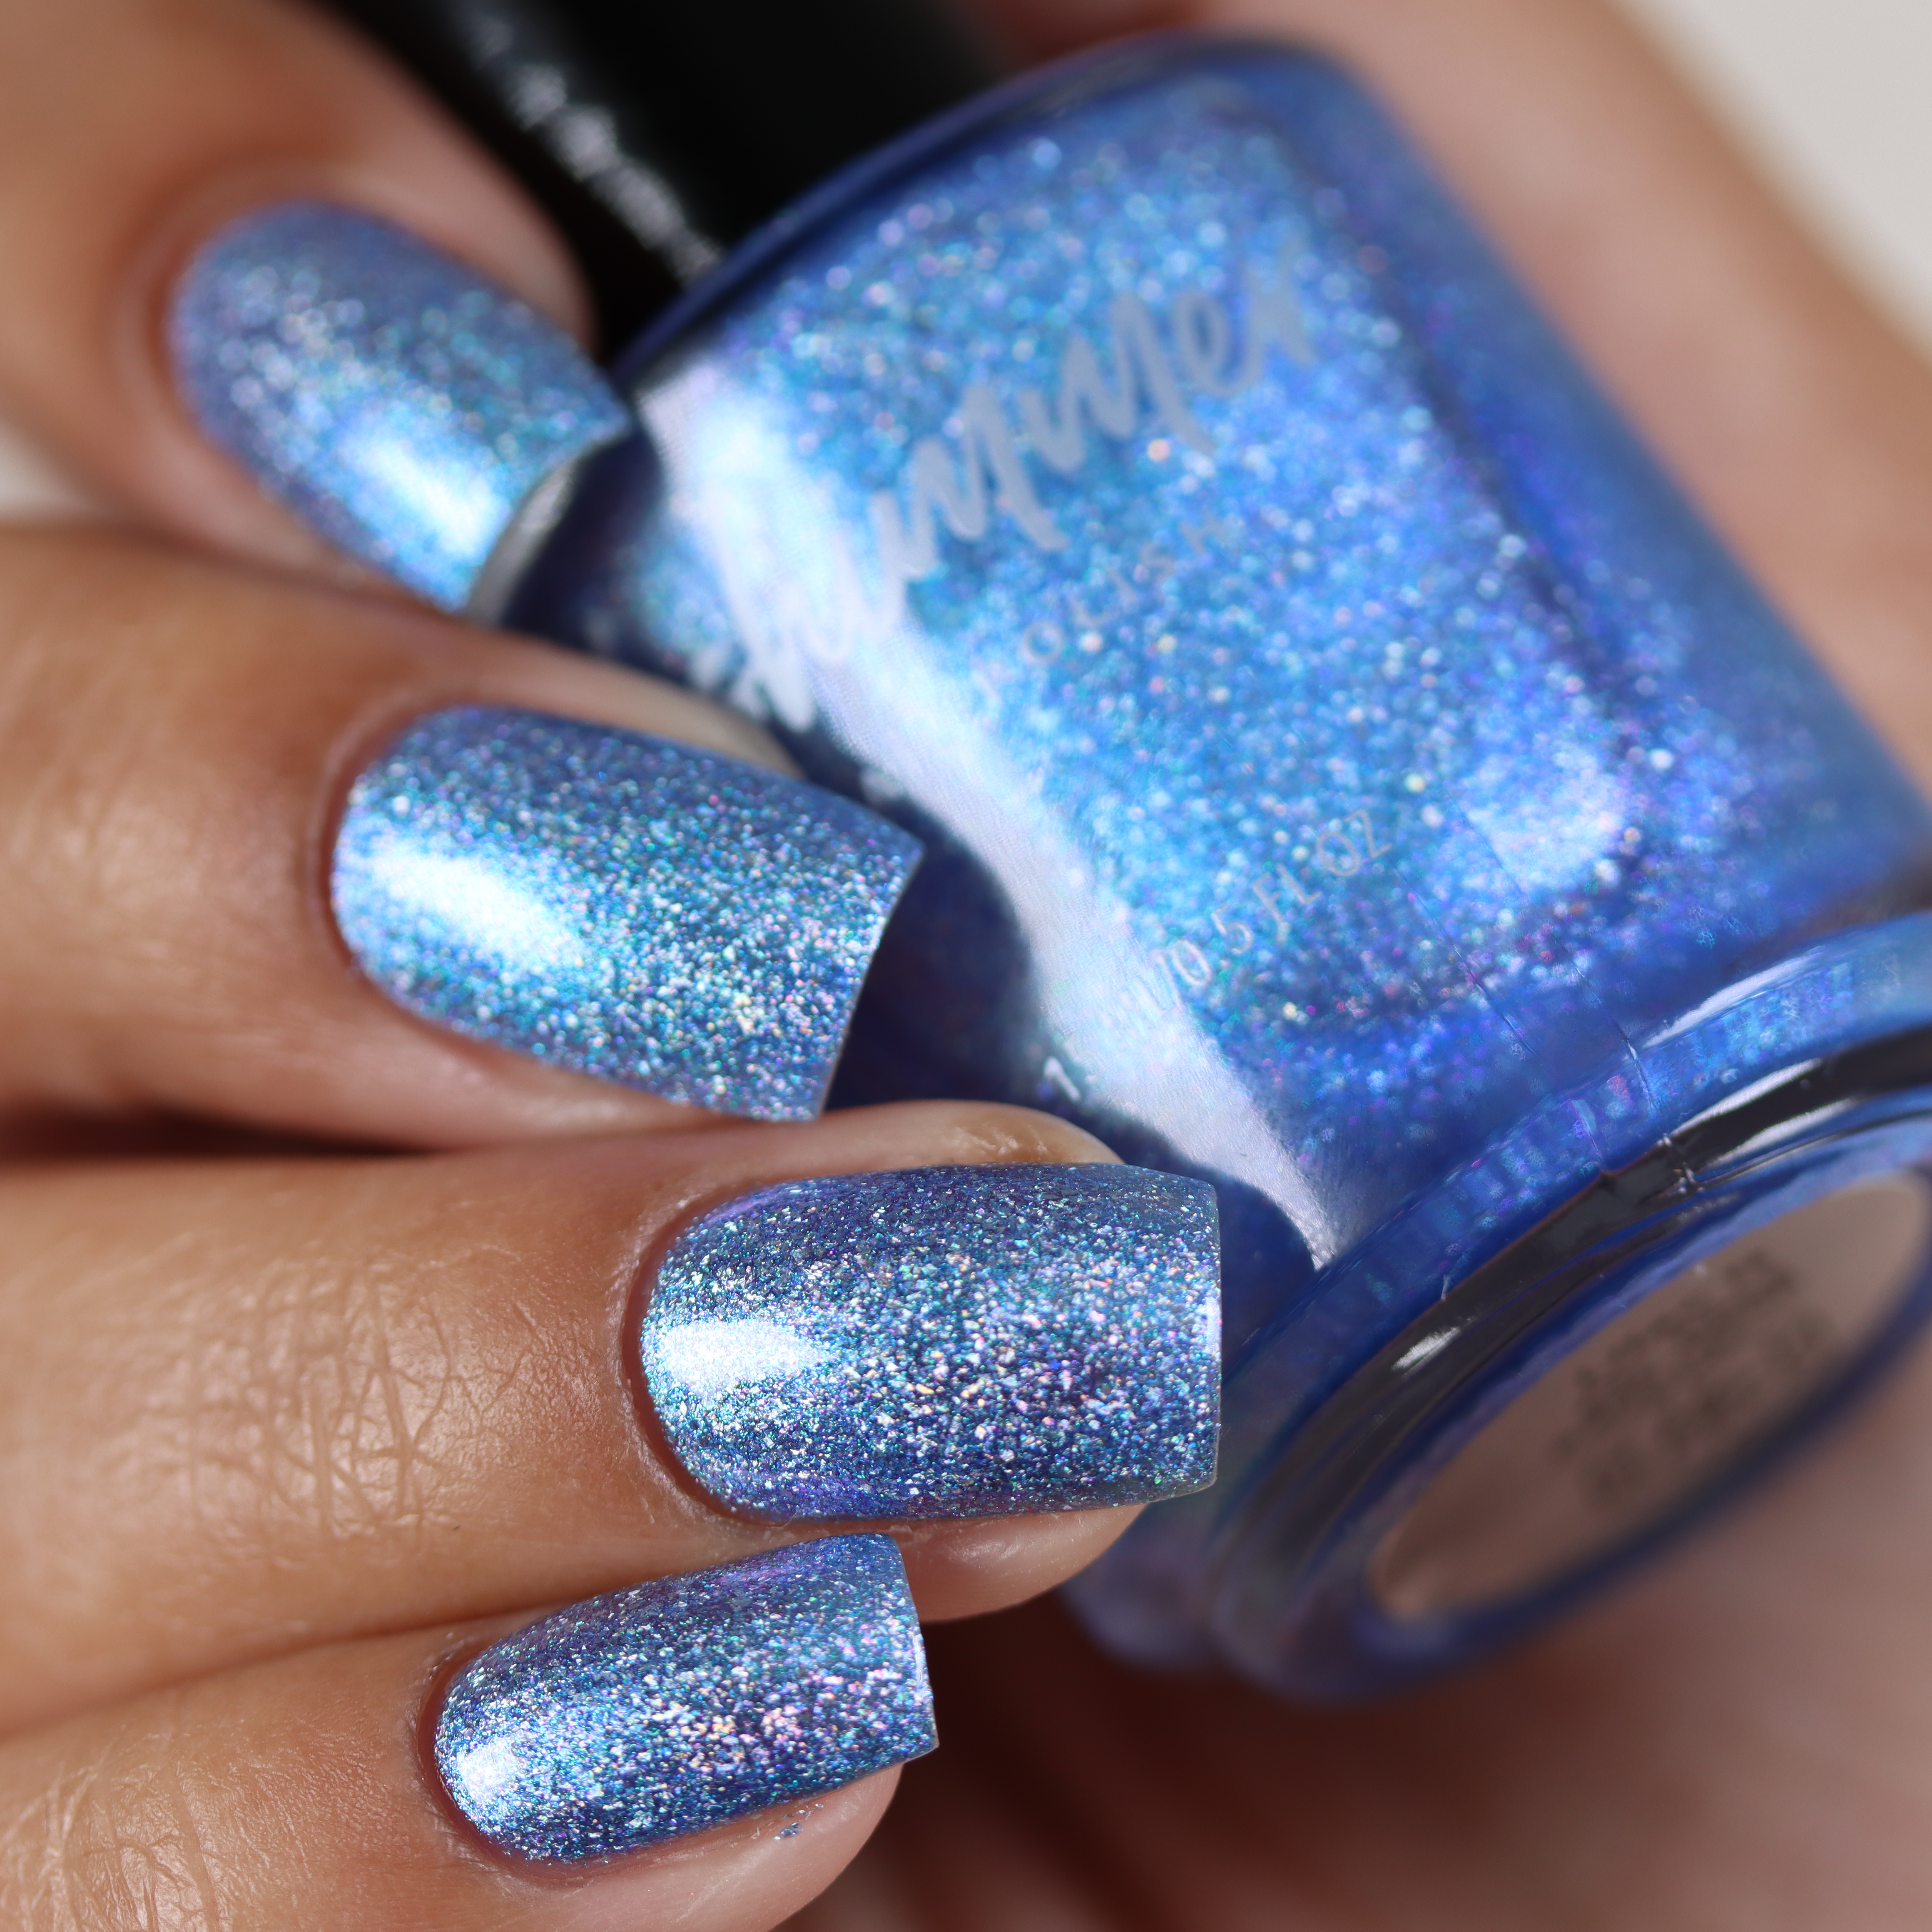 Twinkled T Nail Powder for Holographic Nails (Holographic Powder)